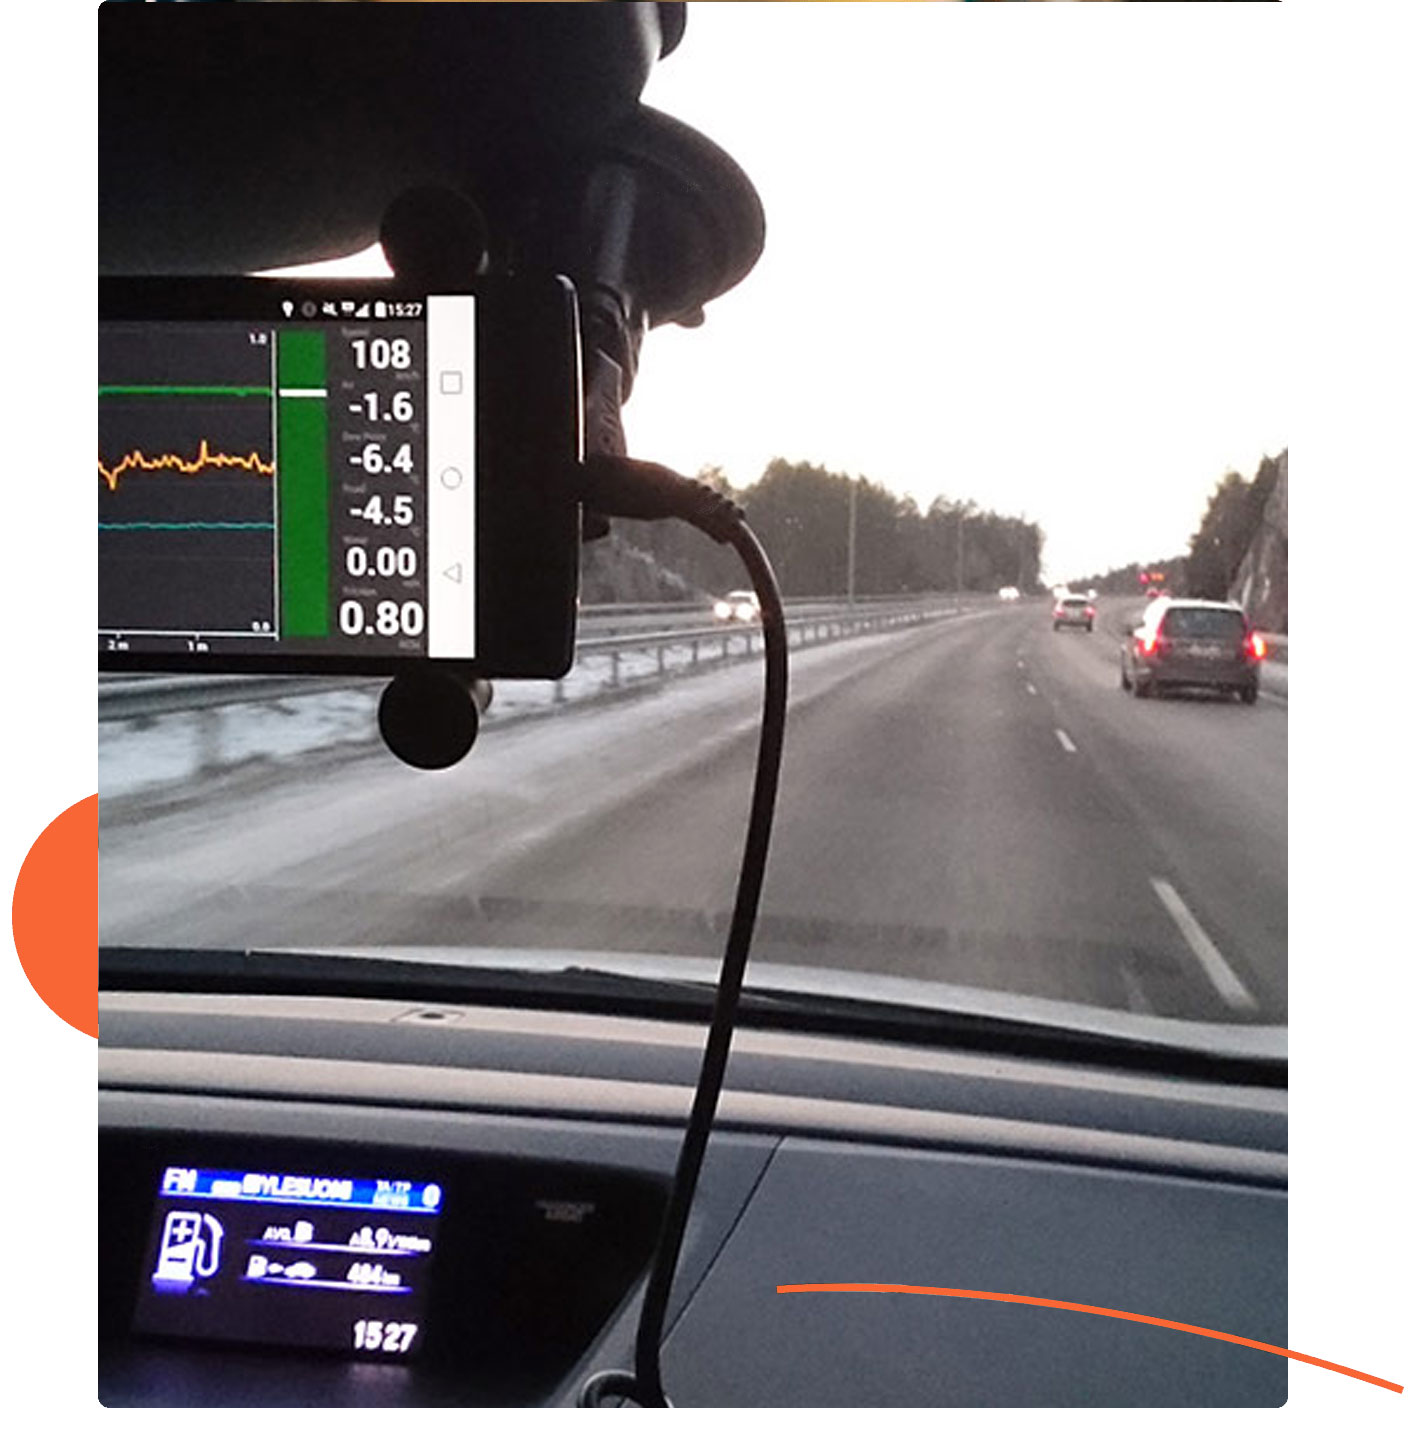 Mobile road surface temperature sensor software on mobile device in moving vehicle